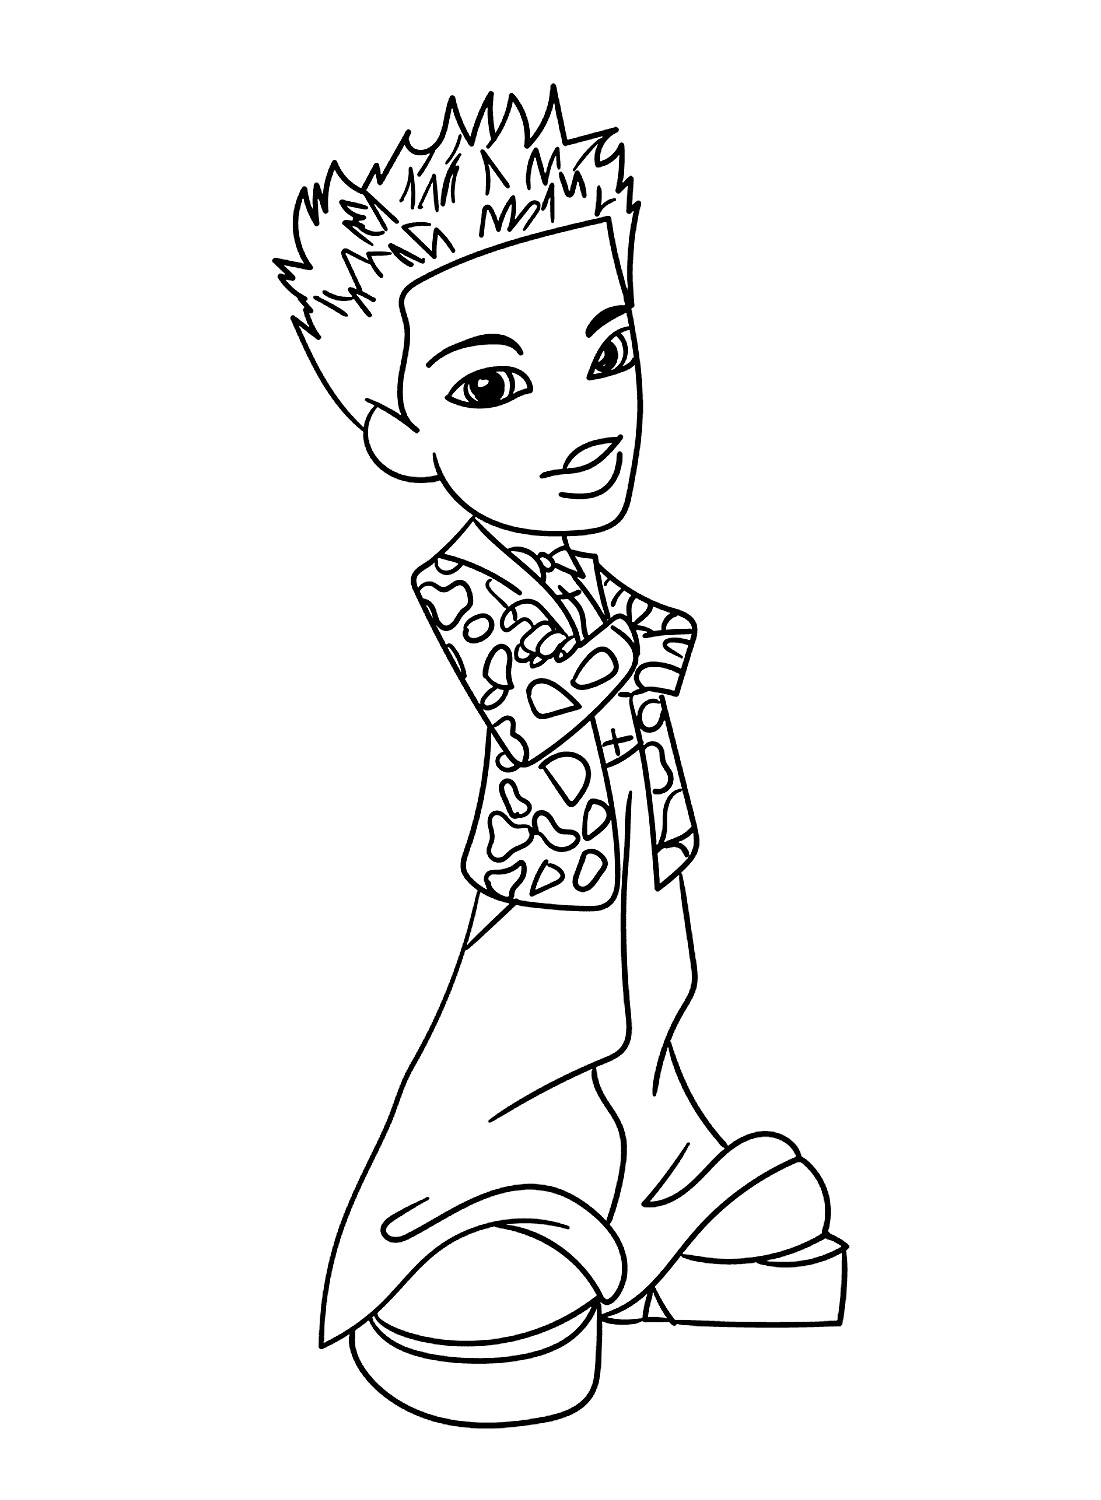 Eitan Coloring Pages